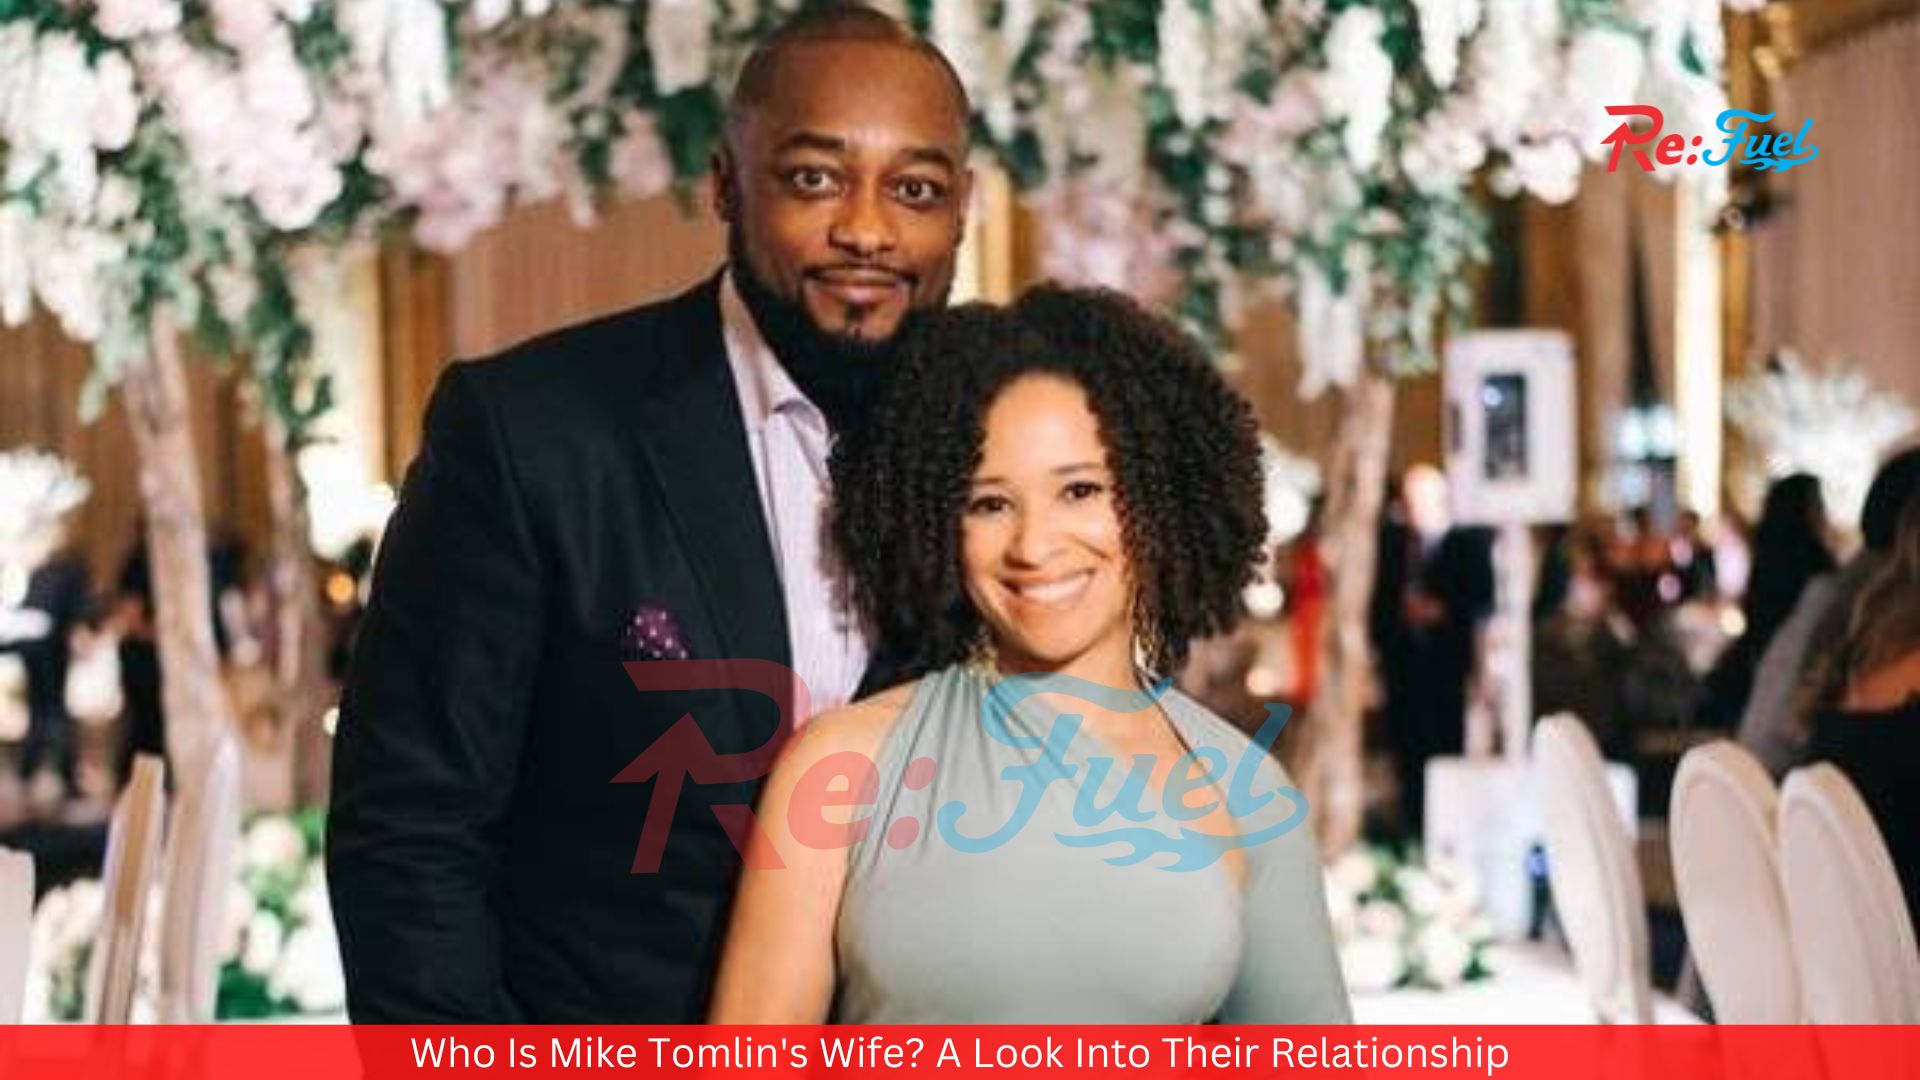 Who Is Mike Tomlin's Wife? A Look Into Their Relationship